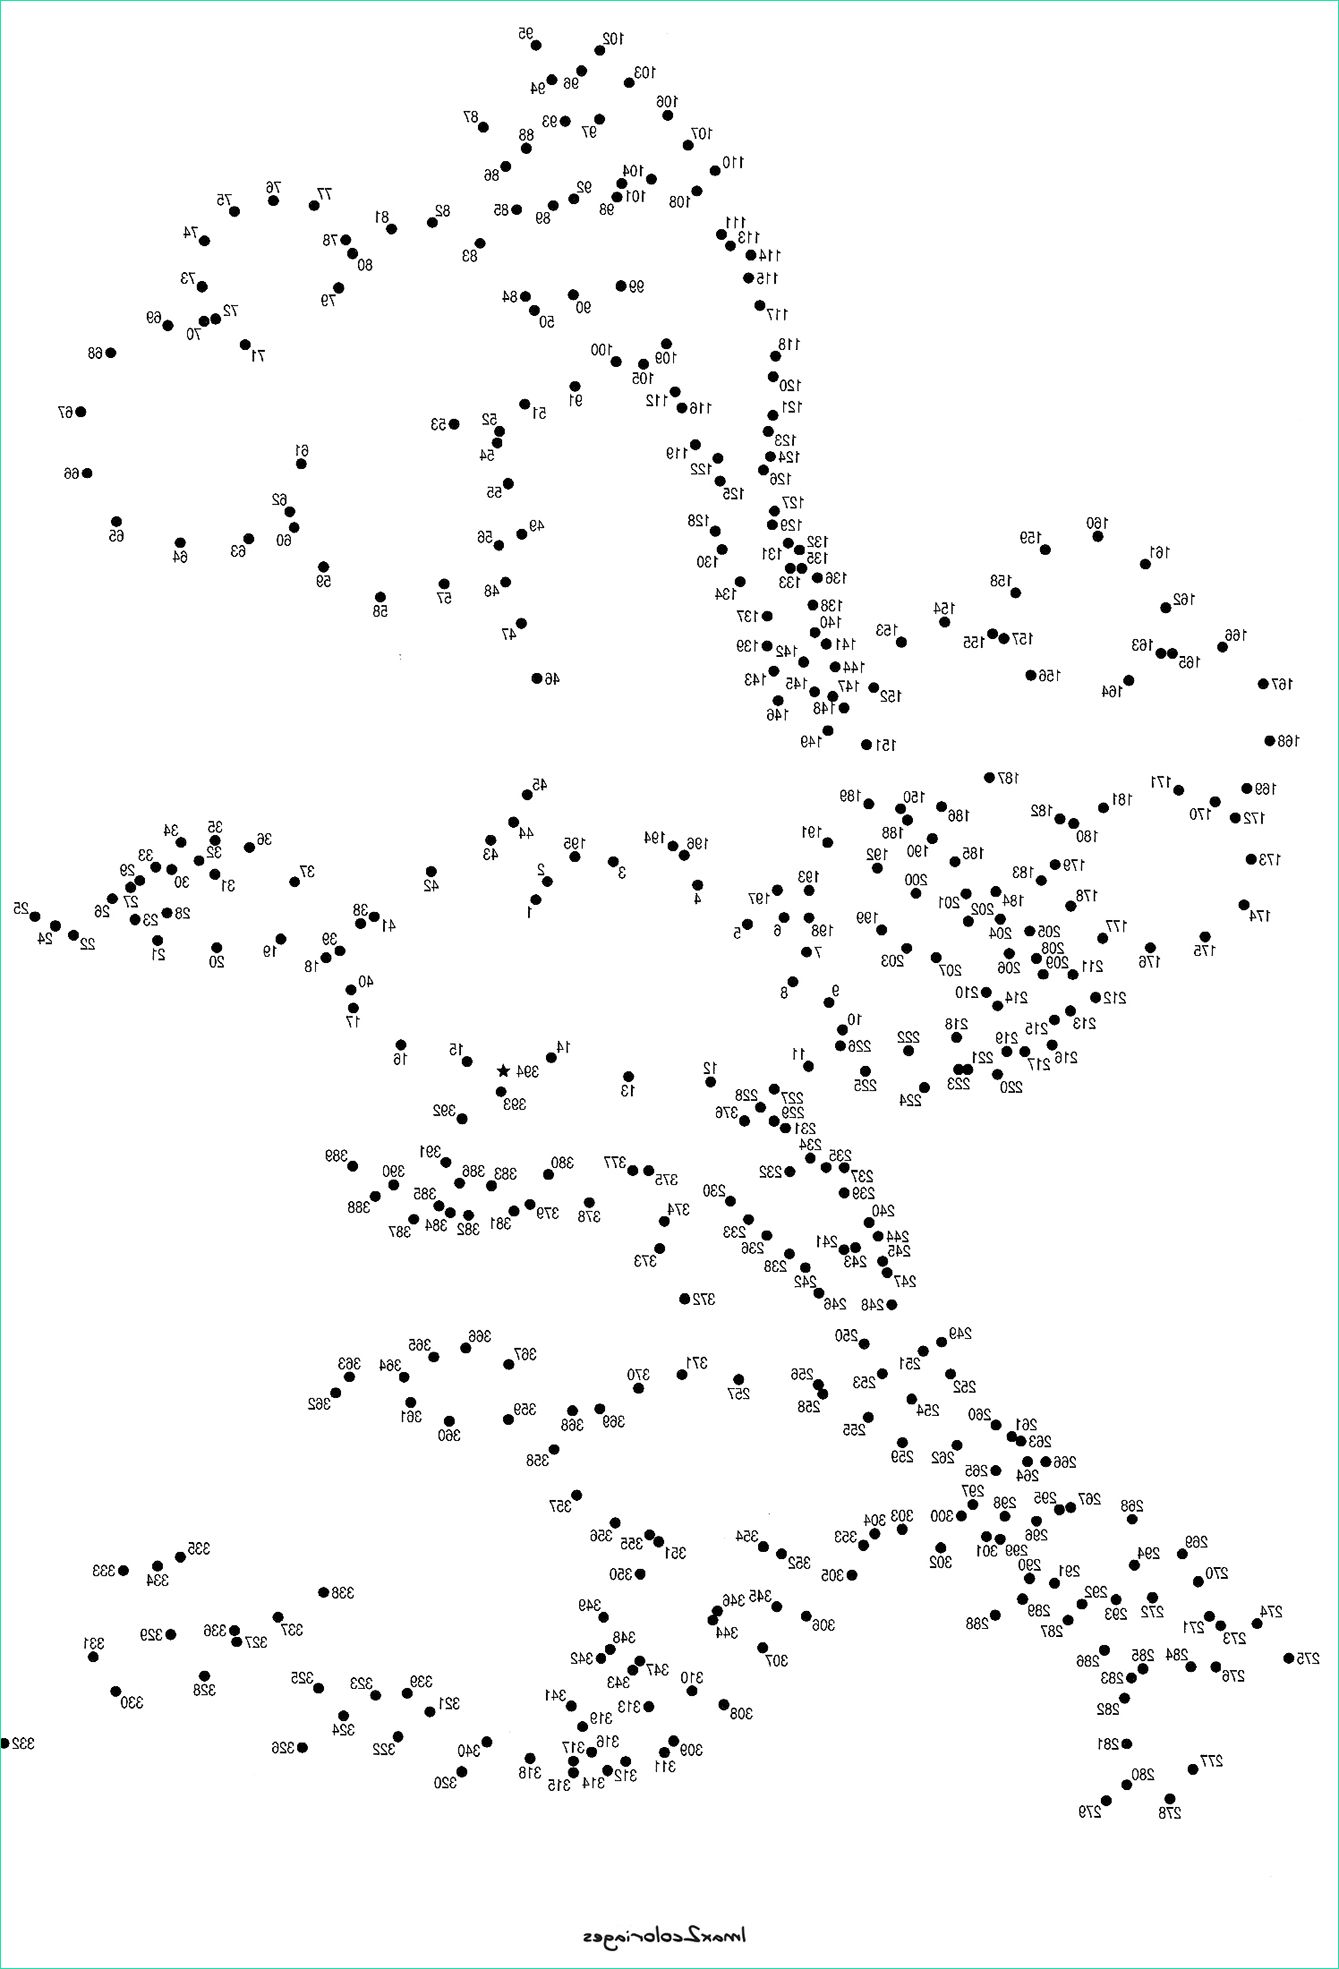 how to process dot to dot puzzle images to convert them into lists of points